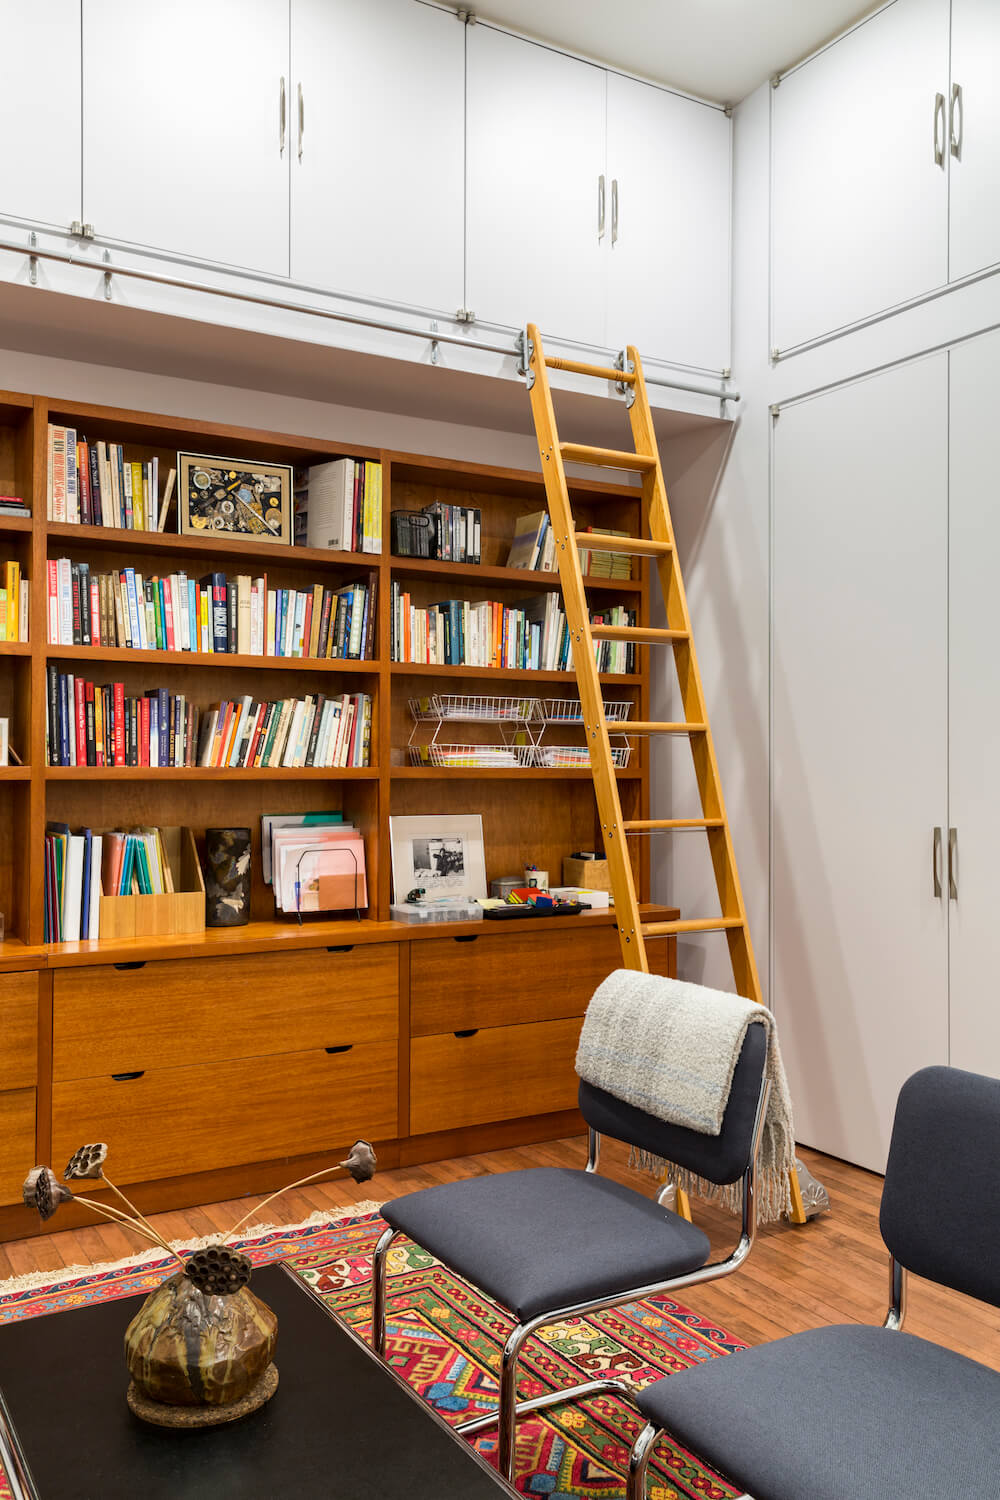 Image of a full wall bookshelf with library ladder and storage